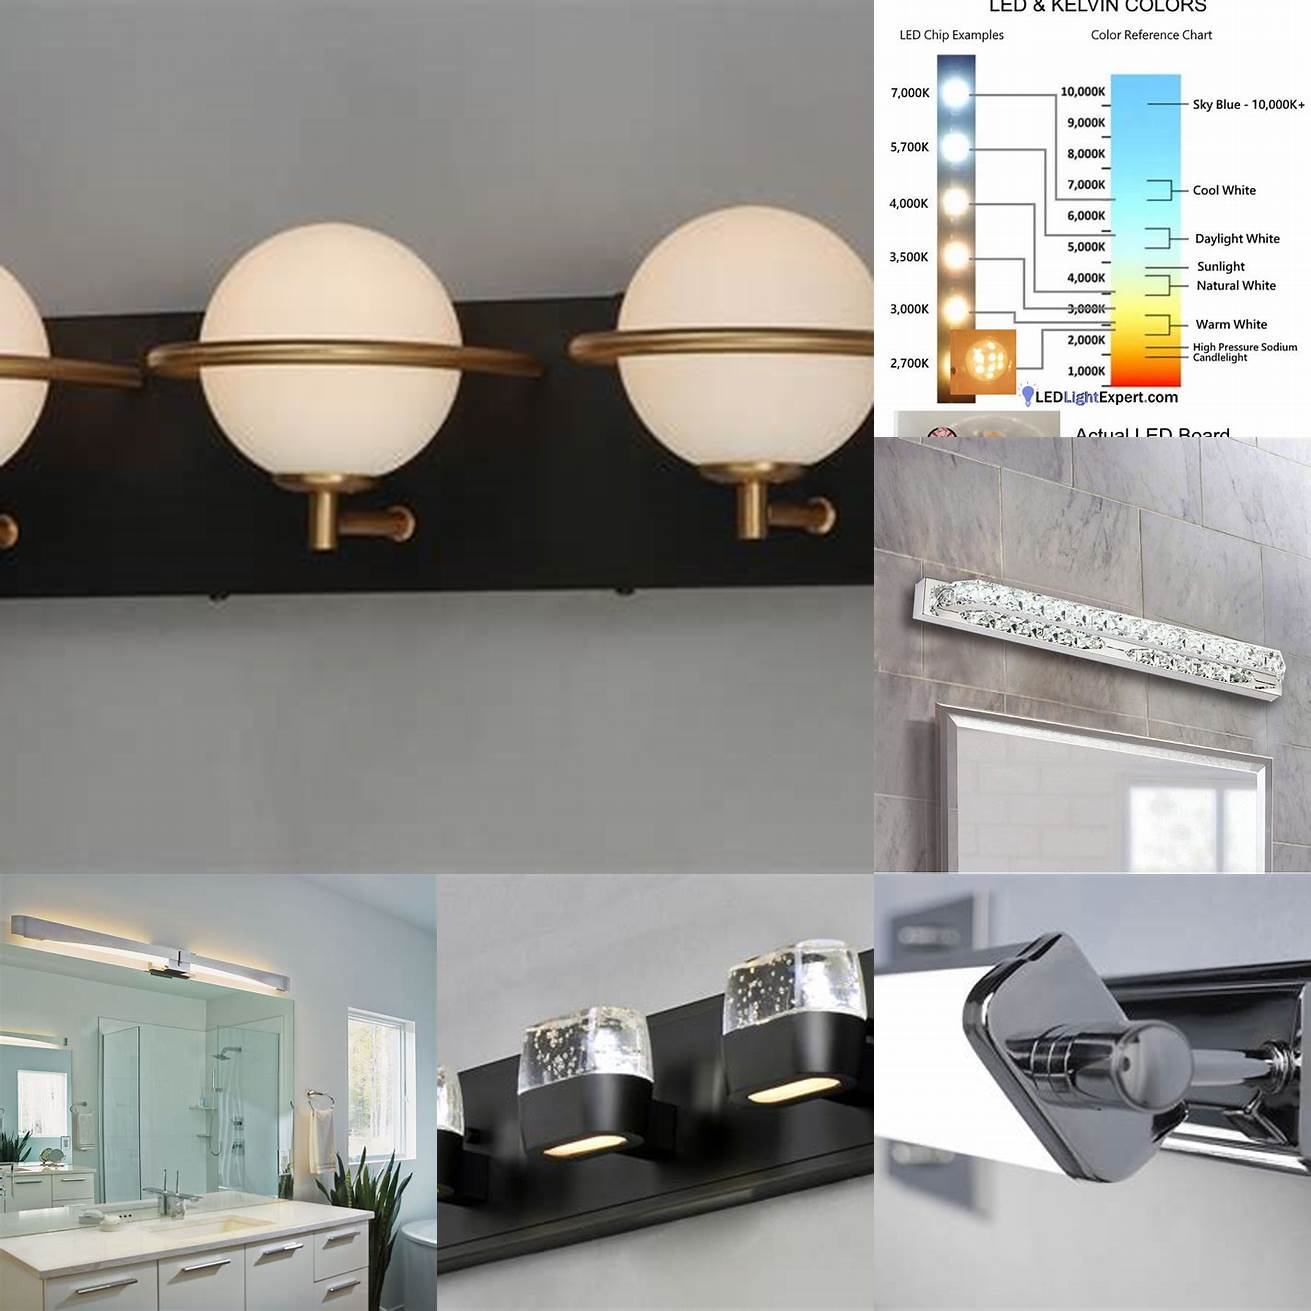 LED Bathroom Vanity Light Bulbs in Different Color Temperatures